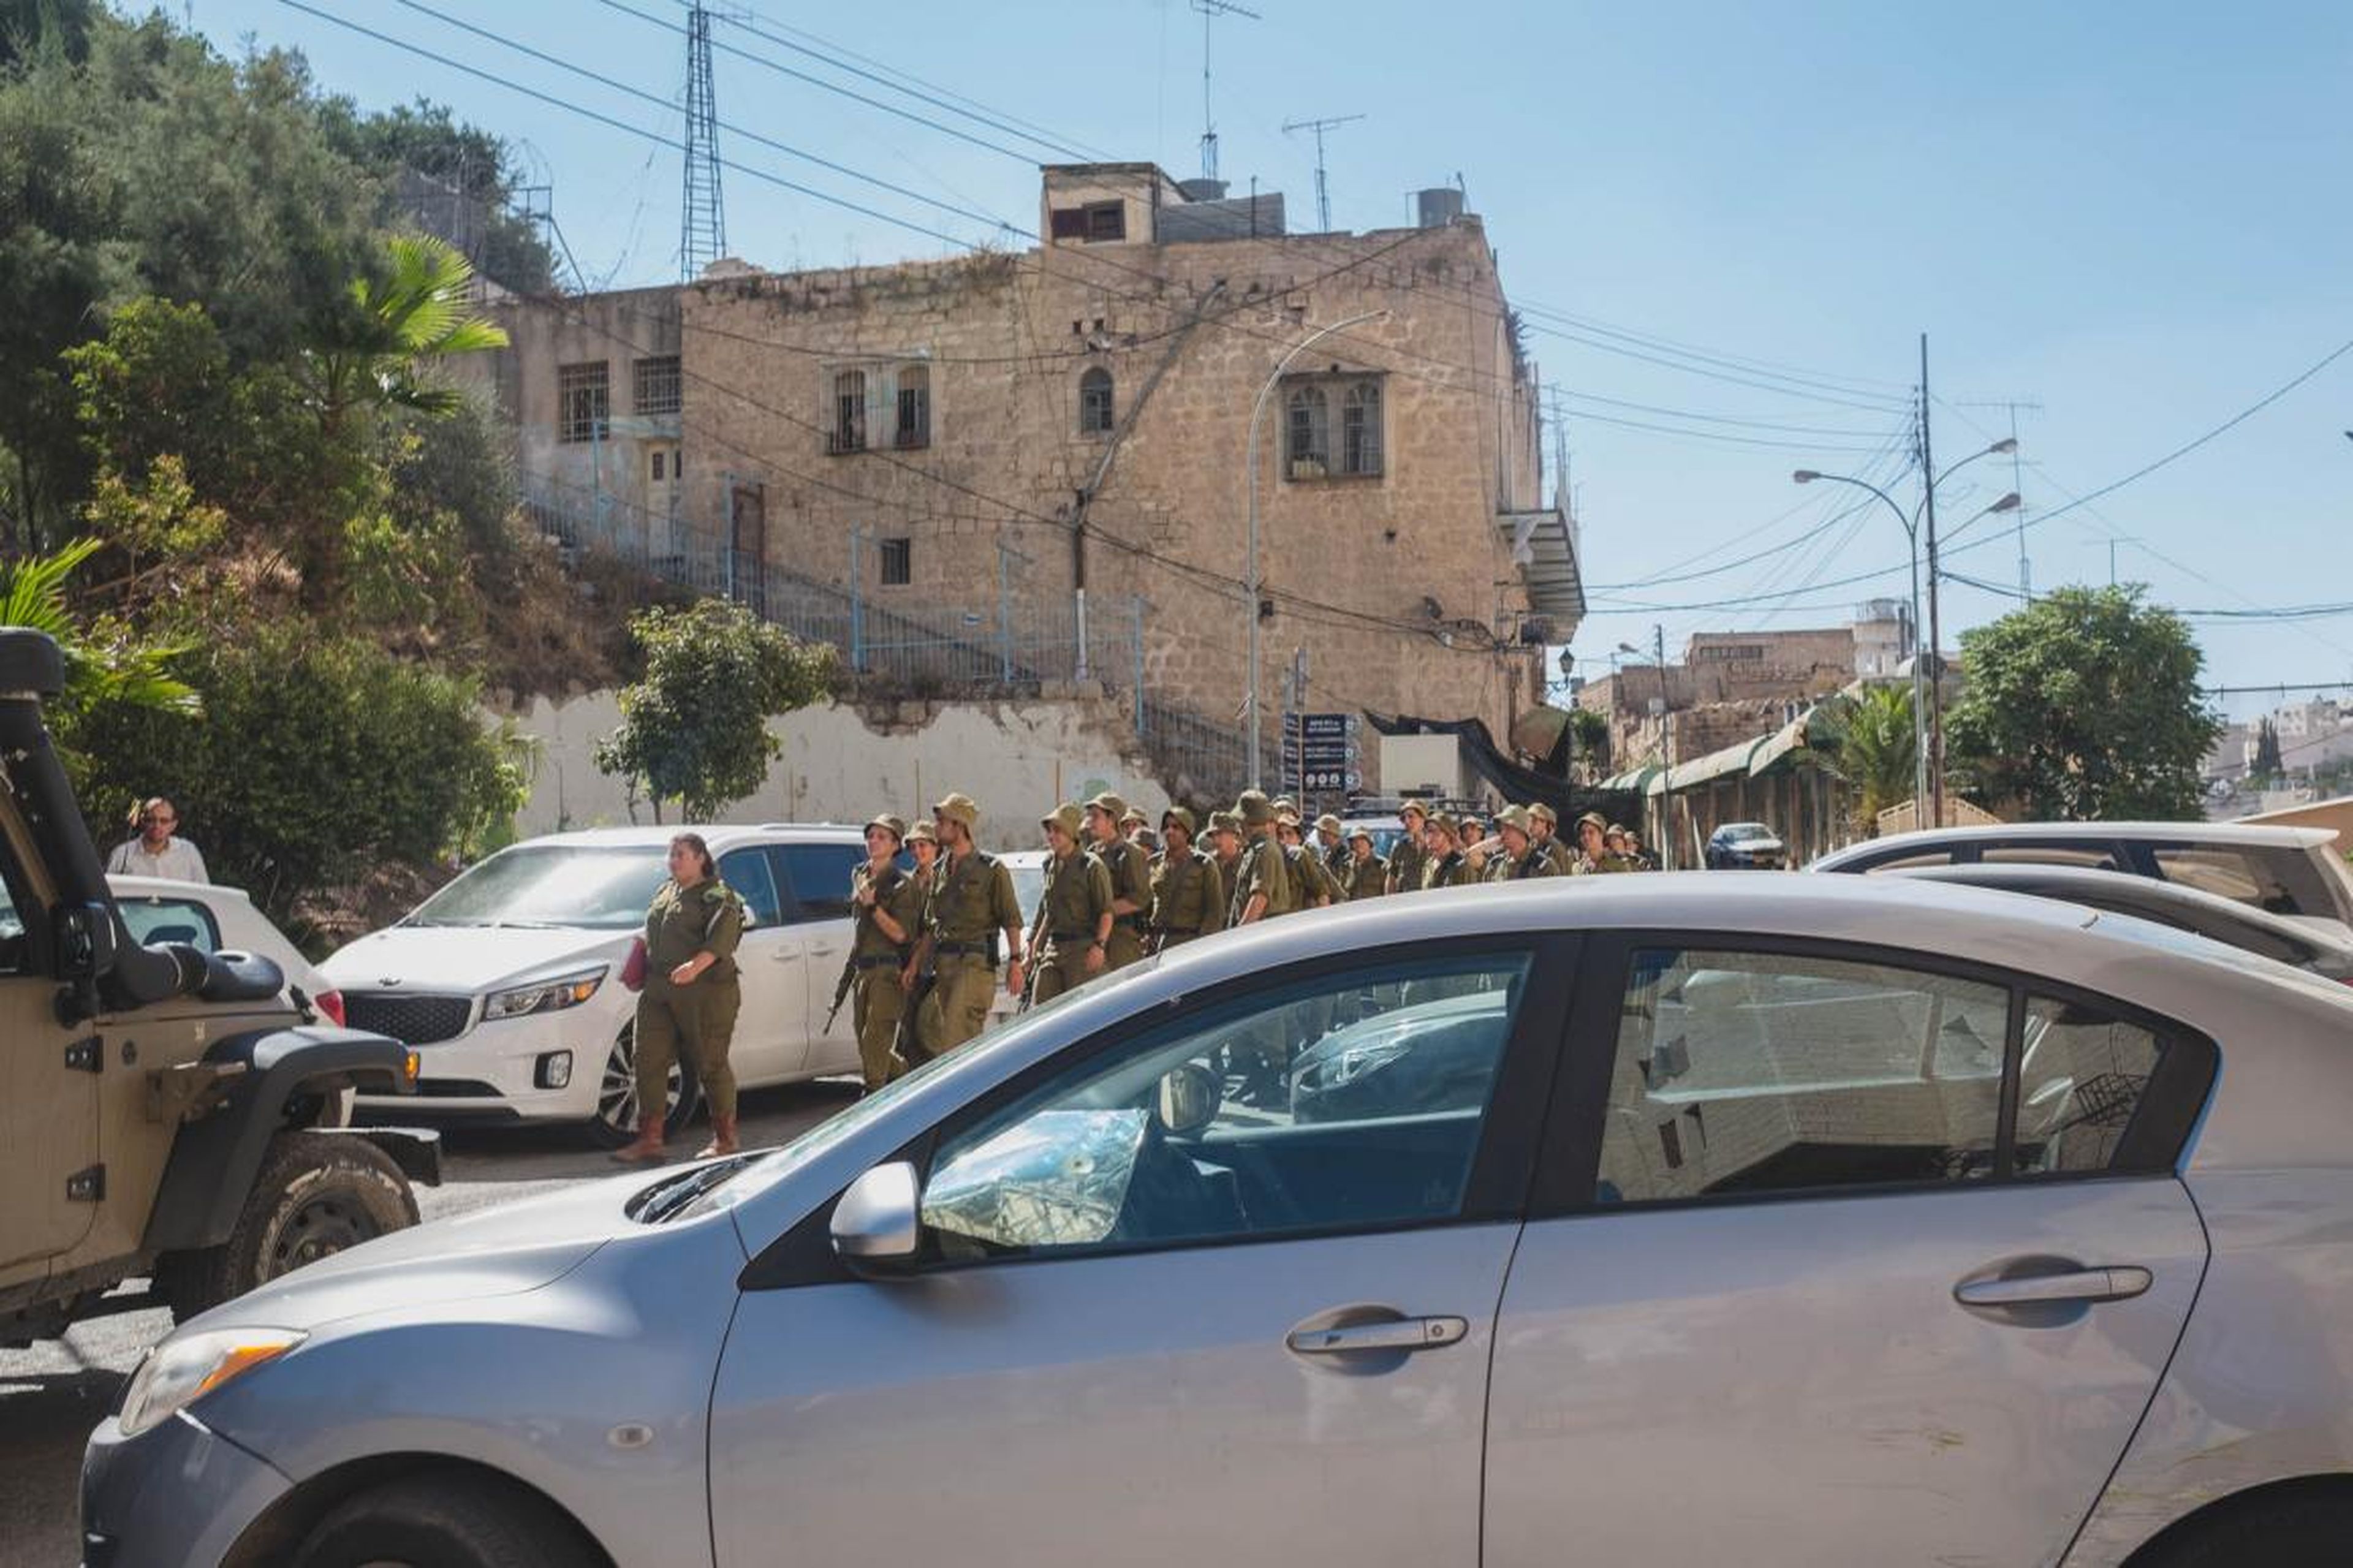 The experience was something like "Israel-Palestine 101." I was deeply affected by the conflicting narratives of both sides, the many painful events suffered in Hebron, and the way in which the city feels a military camp with